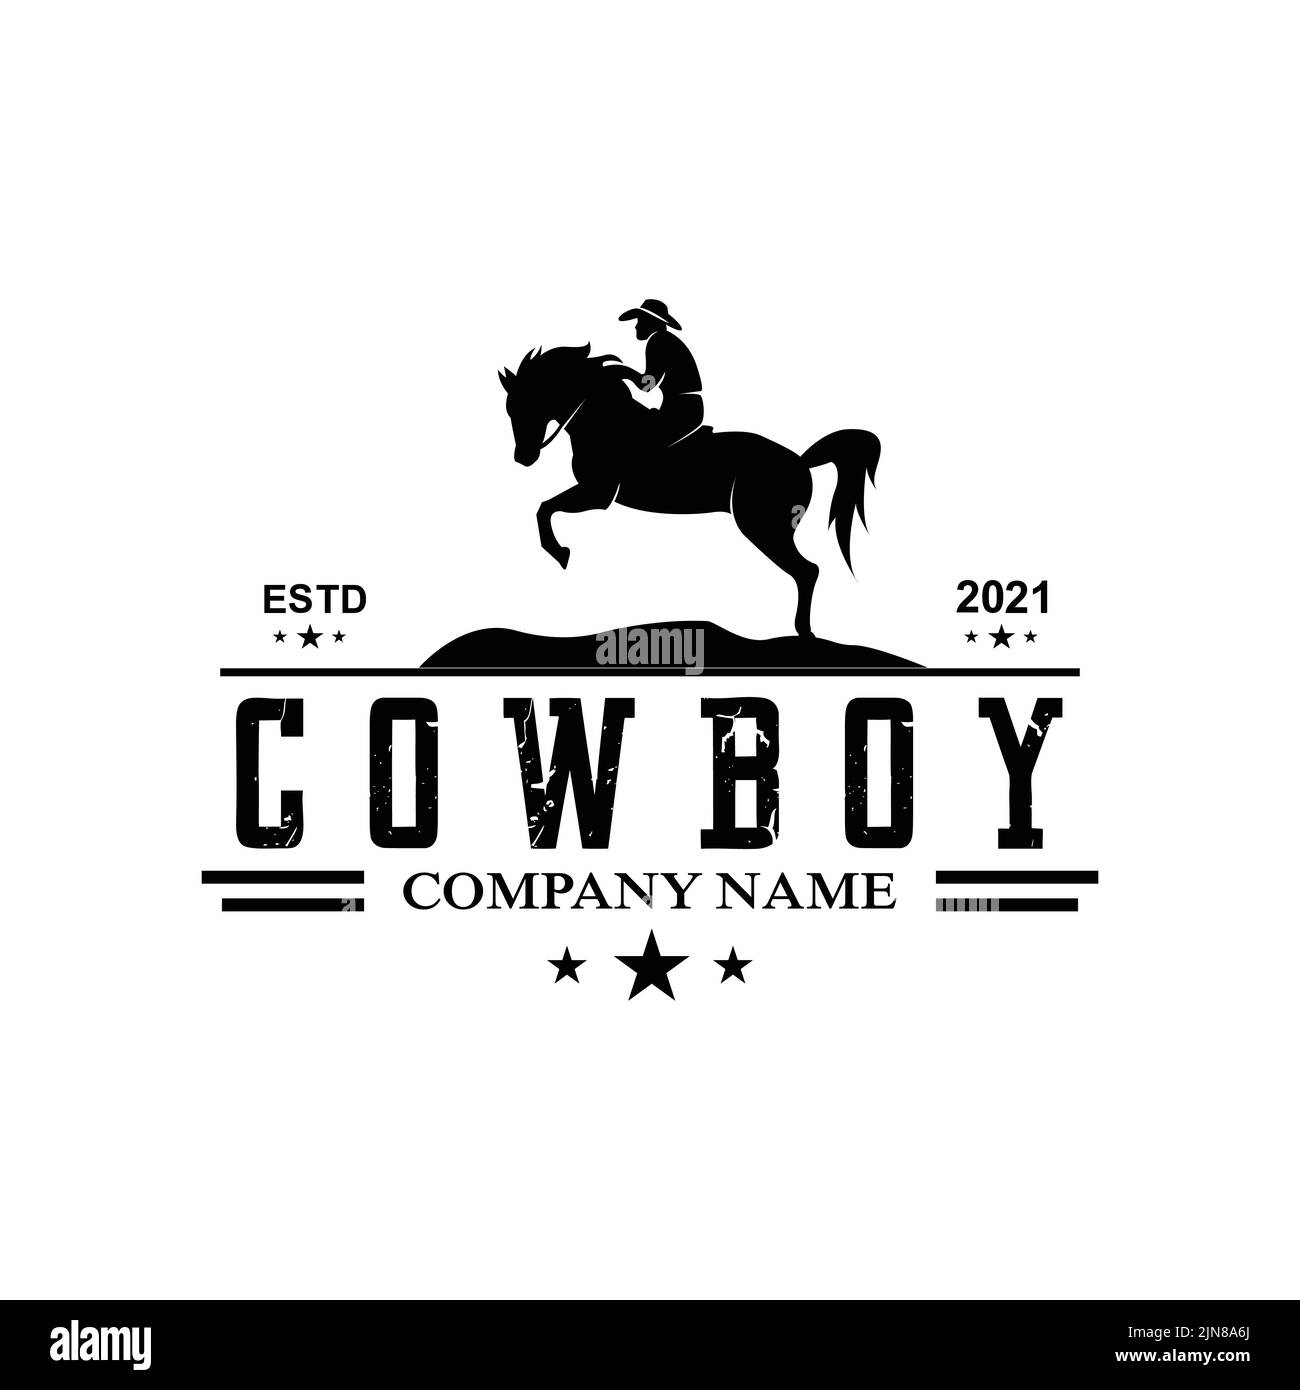 Cowboy Man Riding Horse Powerfully Silhouette at Sunset, icon logo design Stock Vector